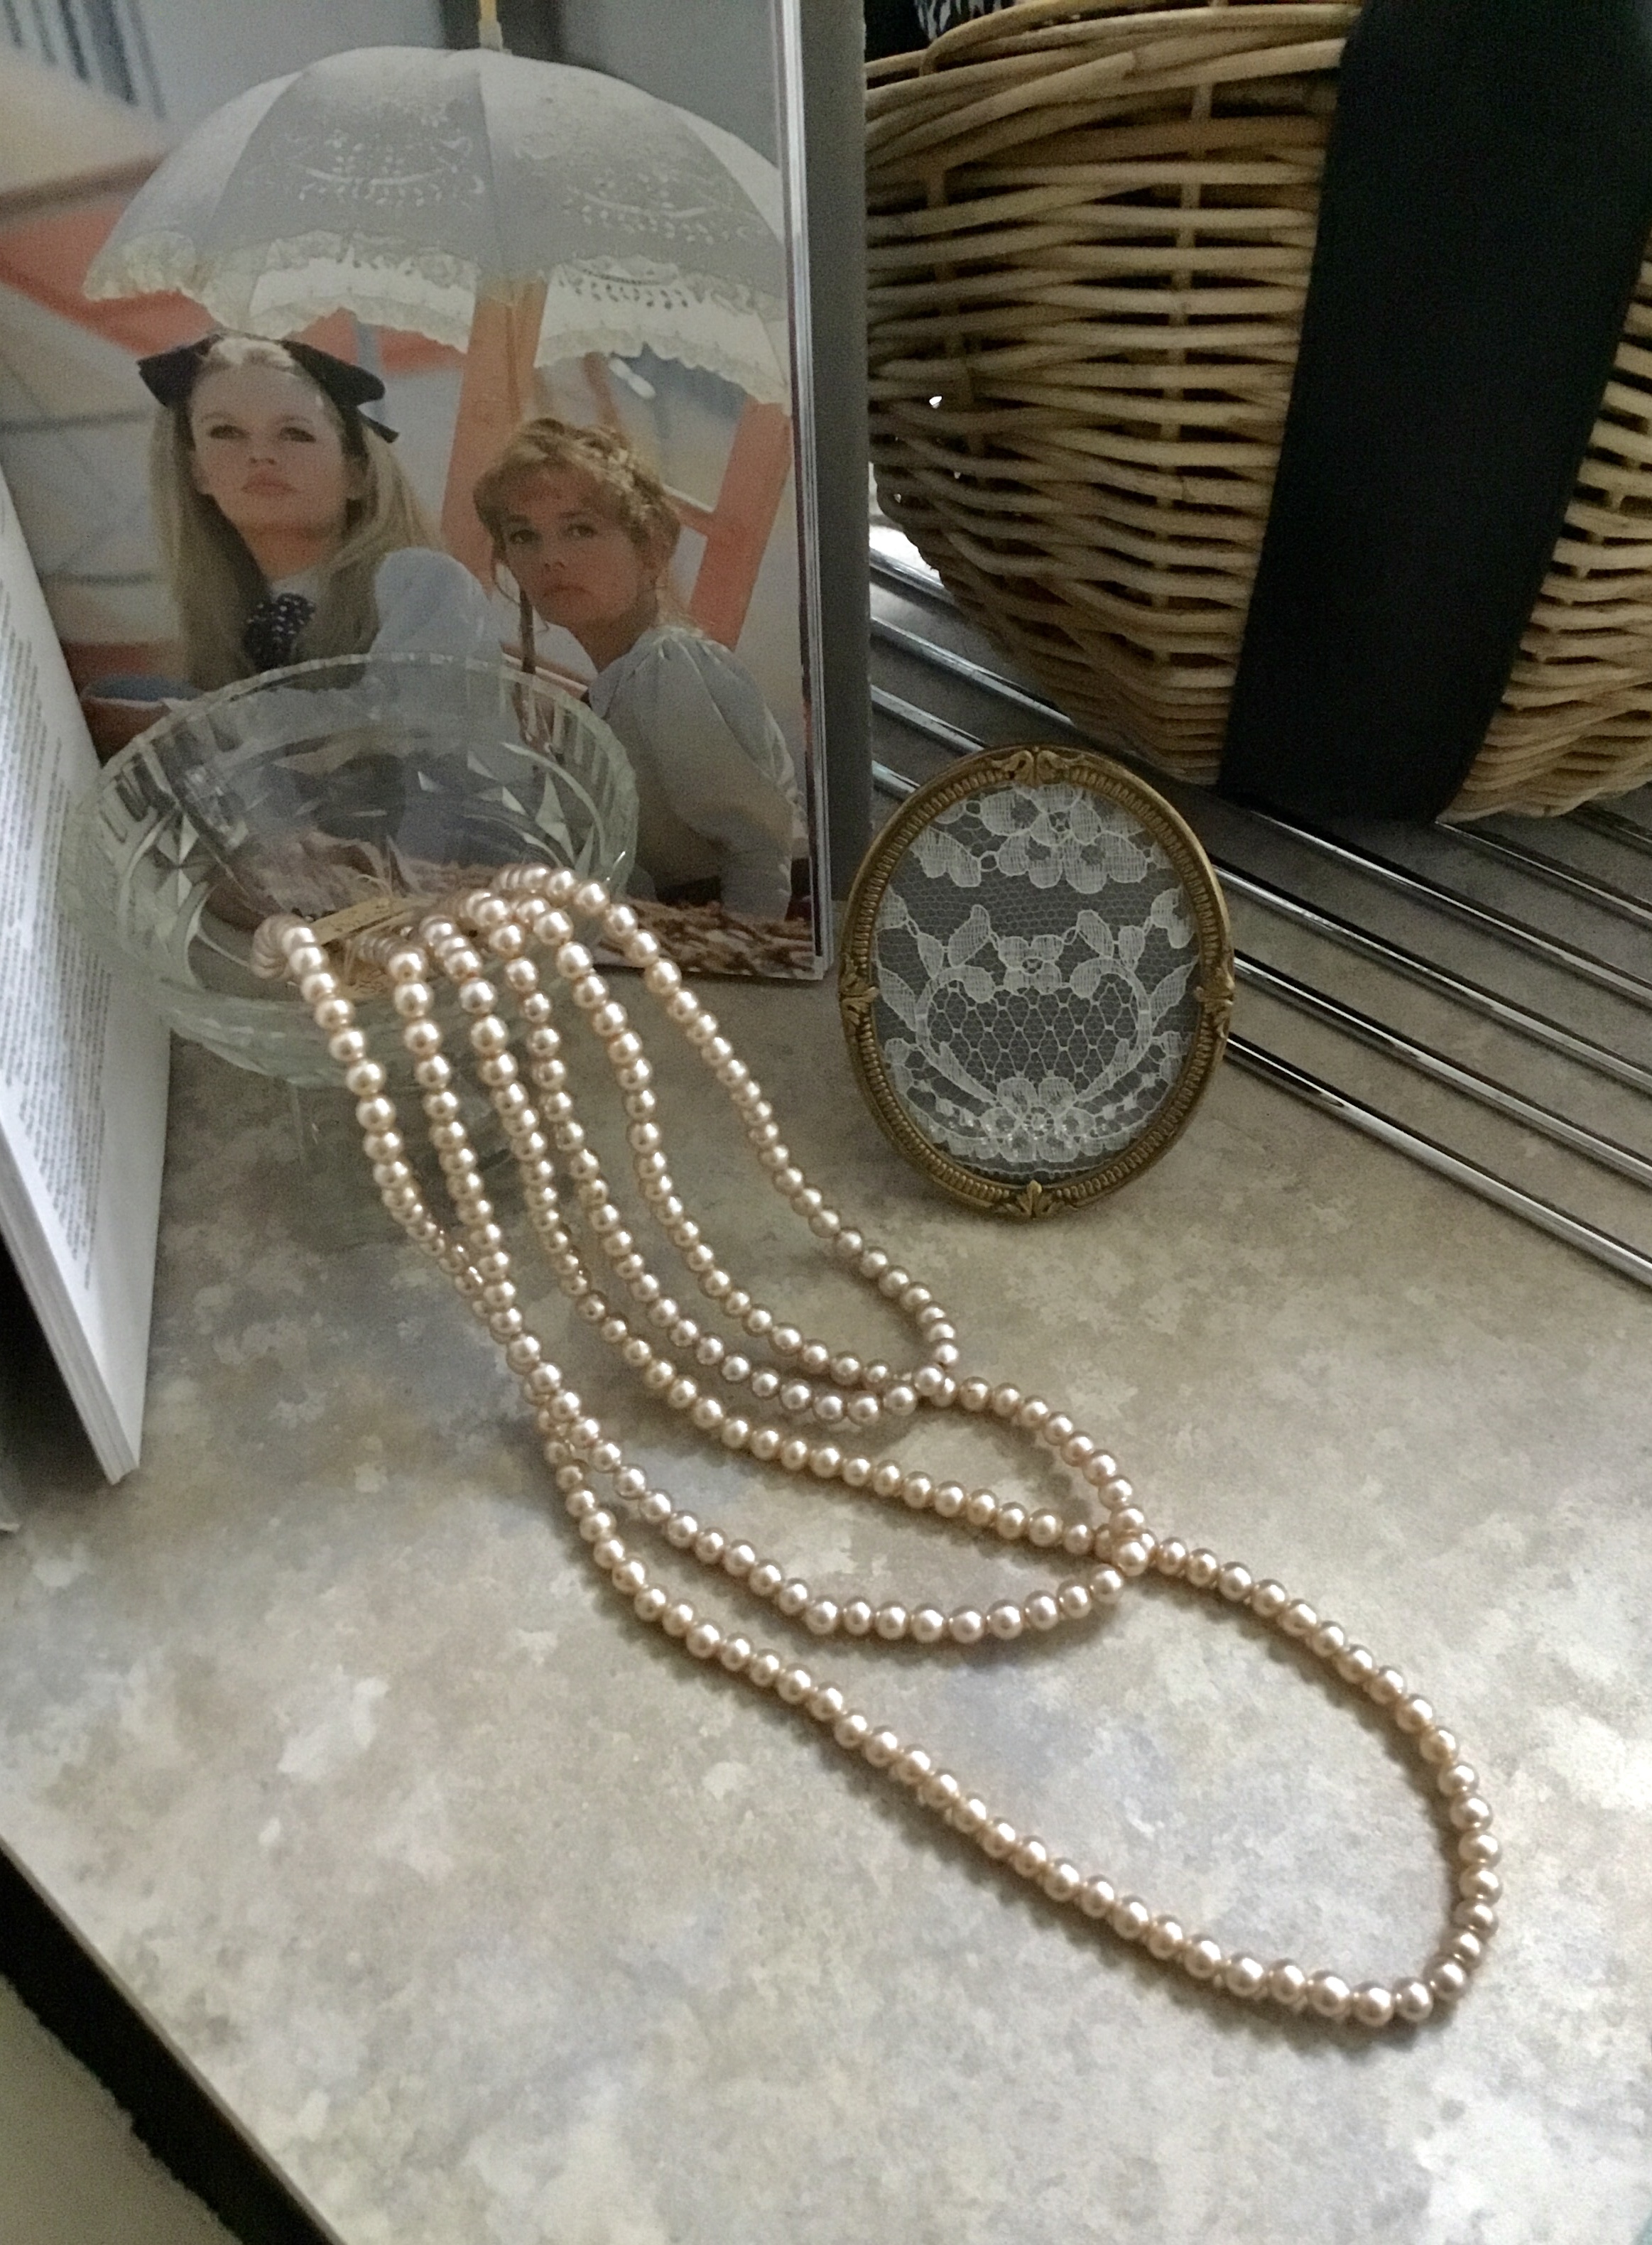 BUY NOW Dazzling 00417  Vintage Glass Pearl Necklace
ヴィンテージ ガラスパールネックレス